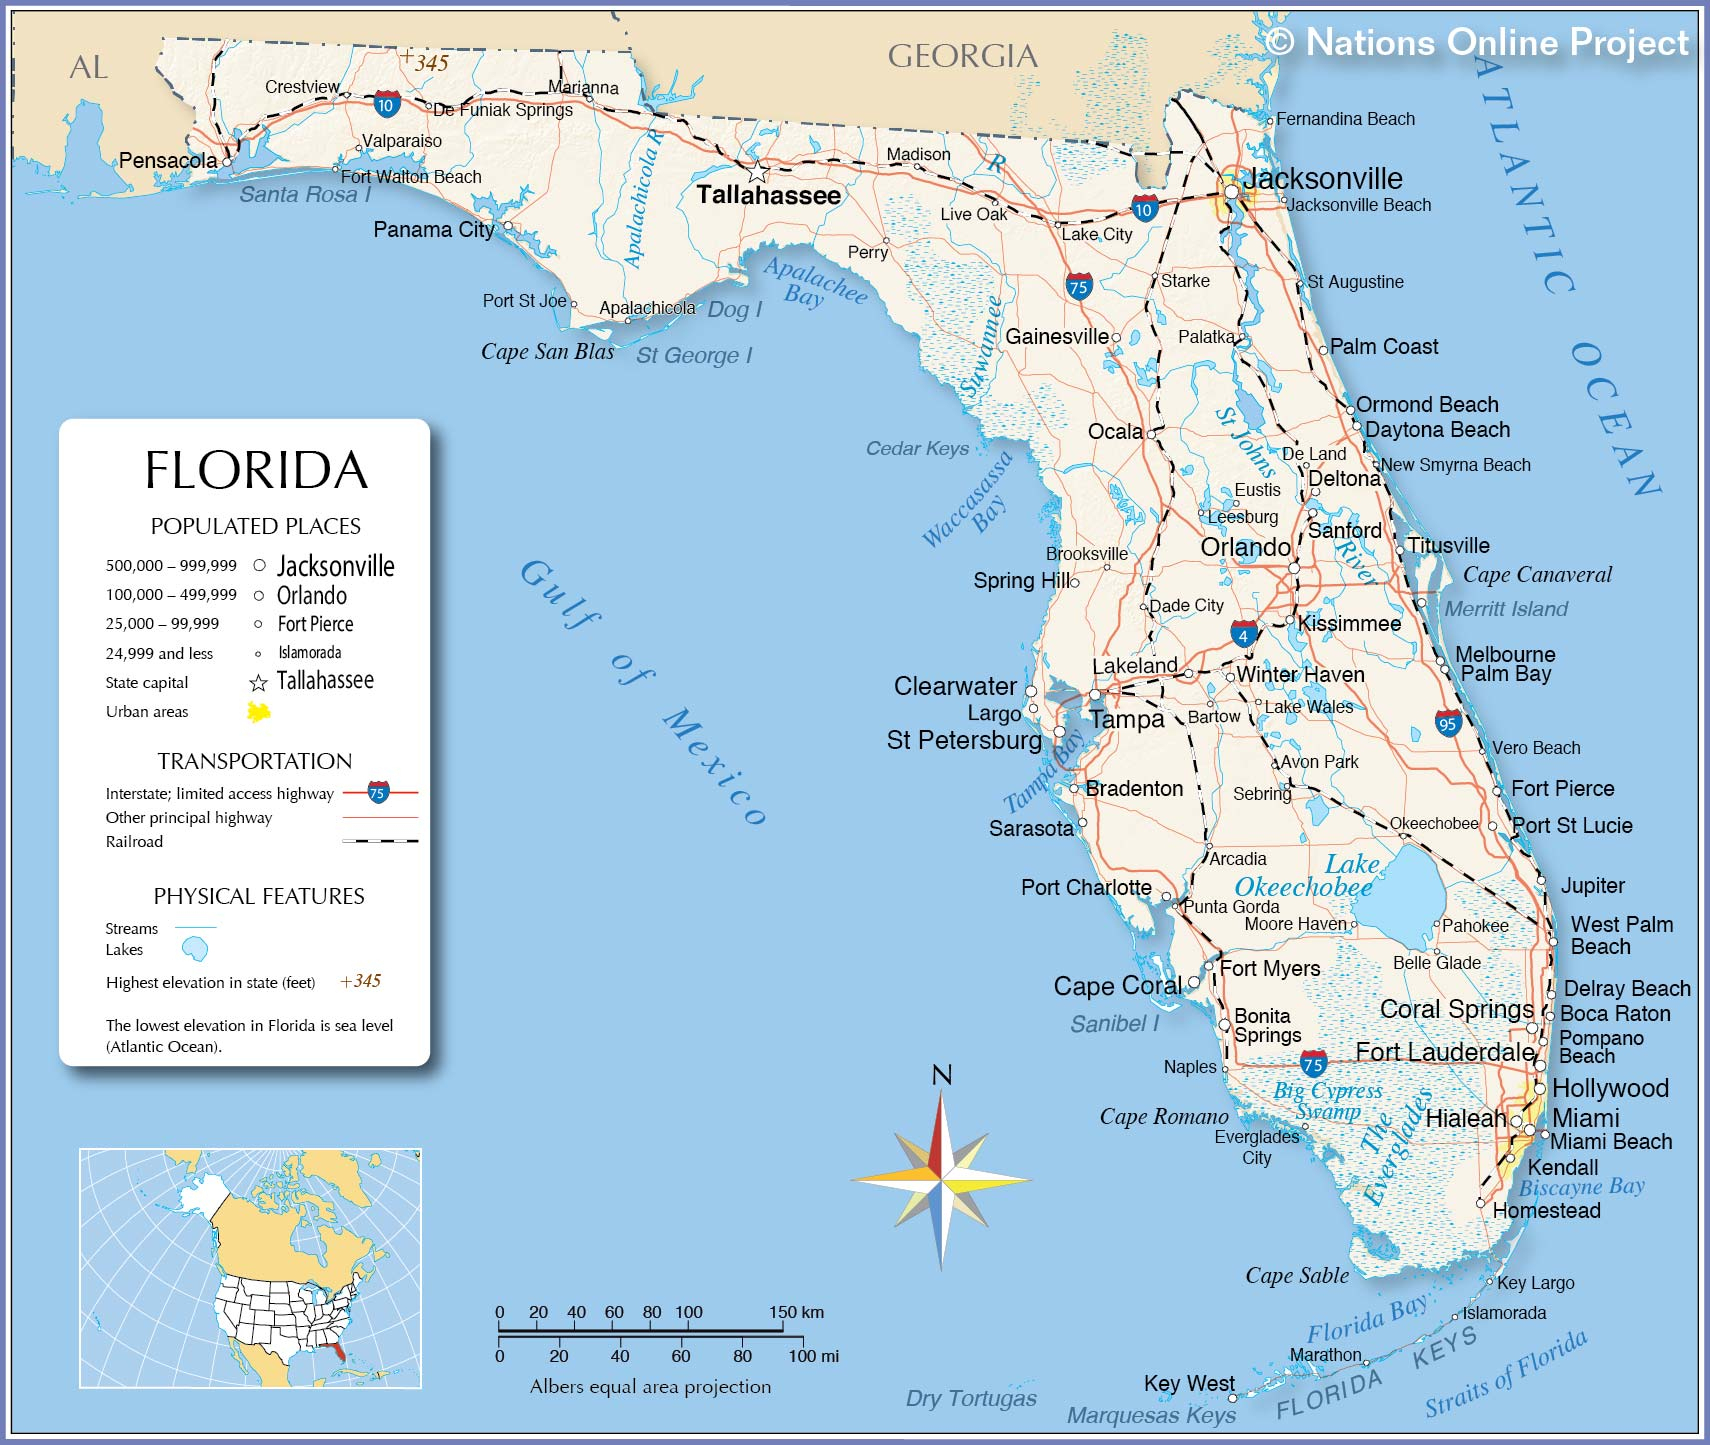 Reference Maps Of Florida, Usa - Nations Online Project - Florida Gulf Coast Towns Map